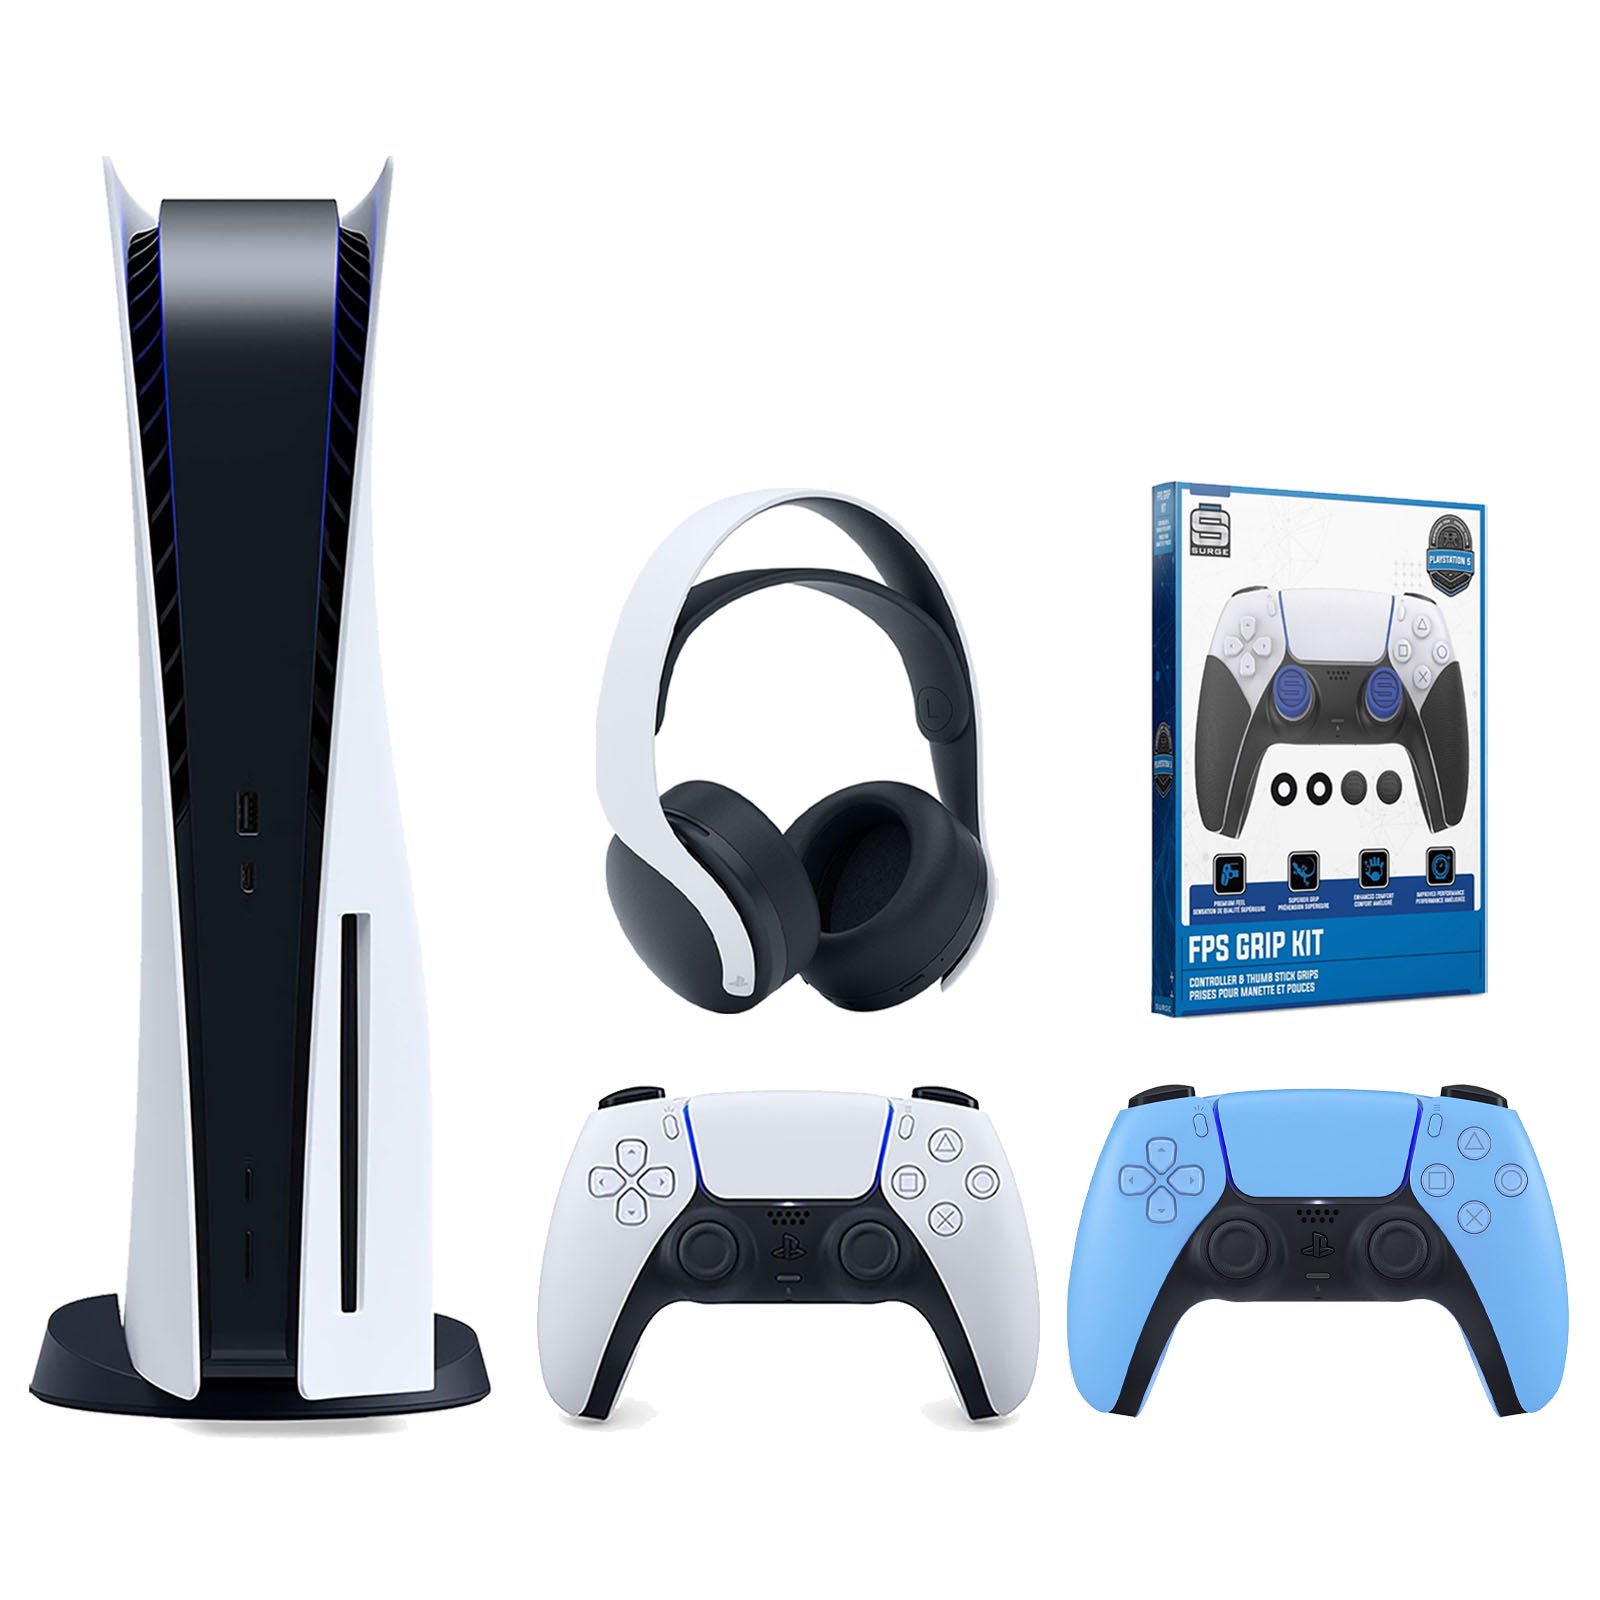 Sony Playstation 5 Disc Version Console with Extra Blue Controller, White PULSE 3D Headset and Surge FPS Grip Kit With Precision Aiming Rings Bundle - Pro-Distributing